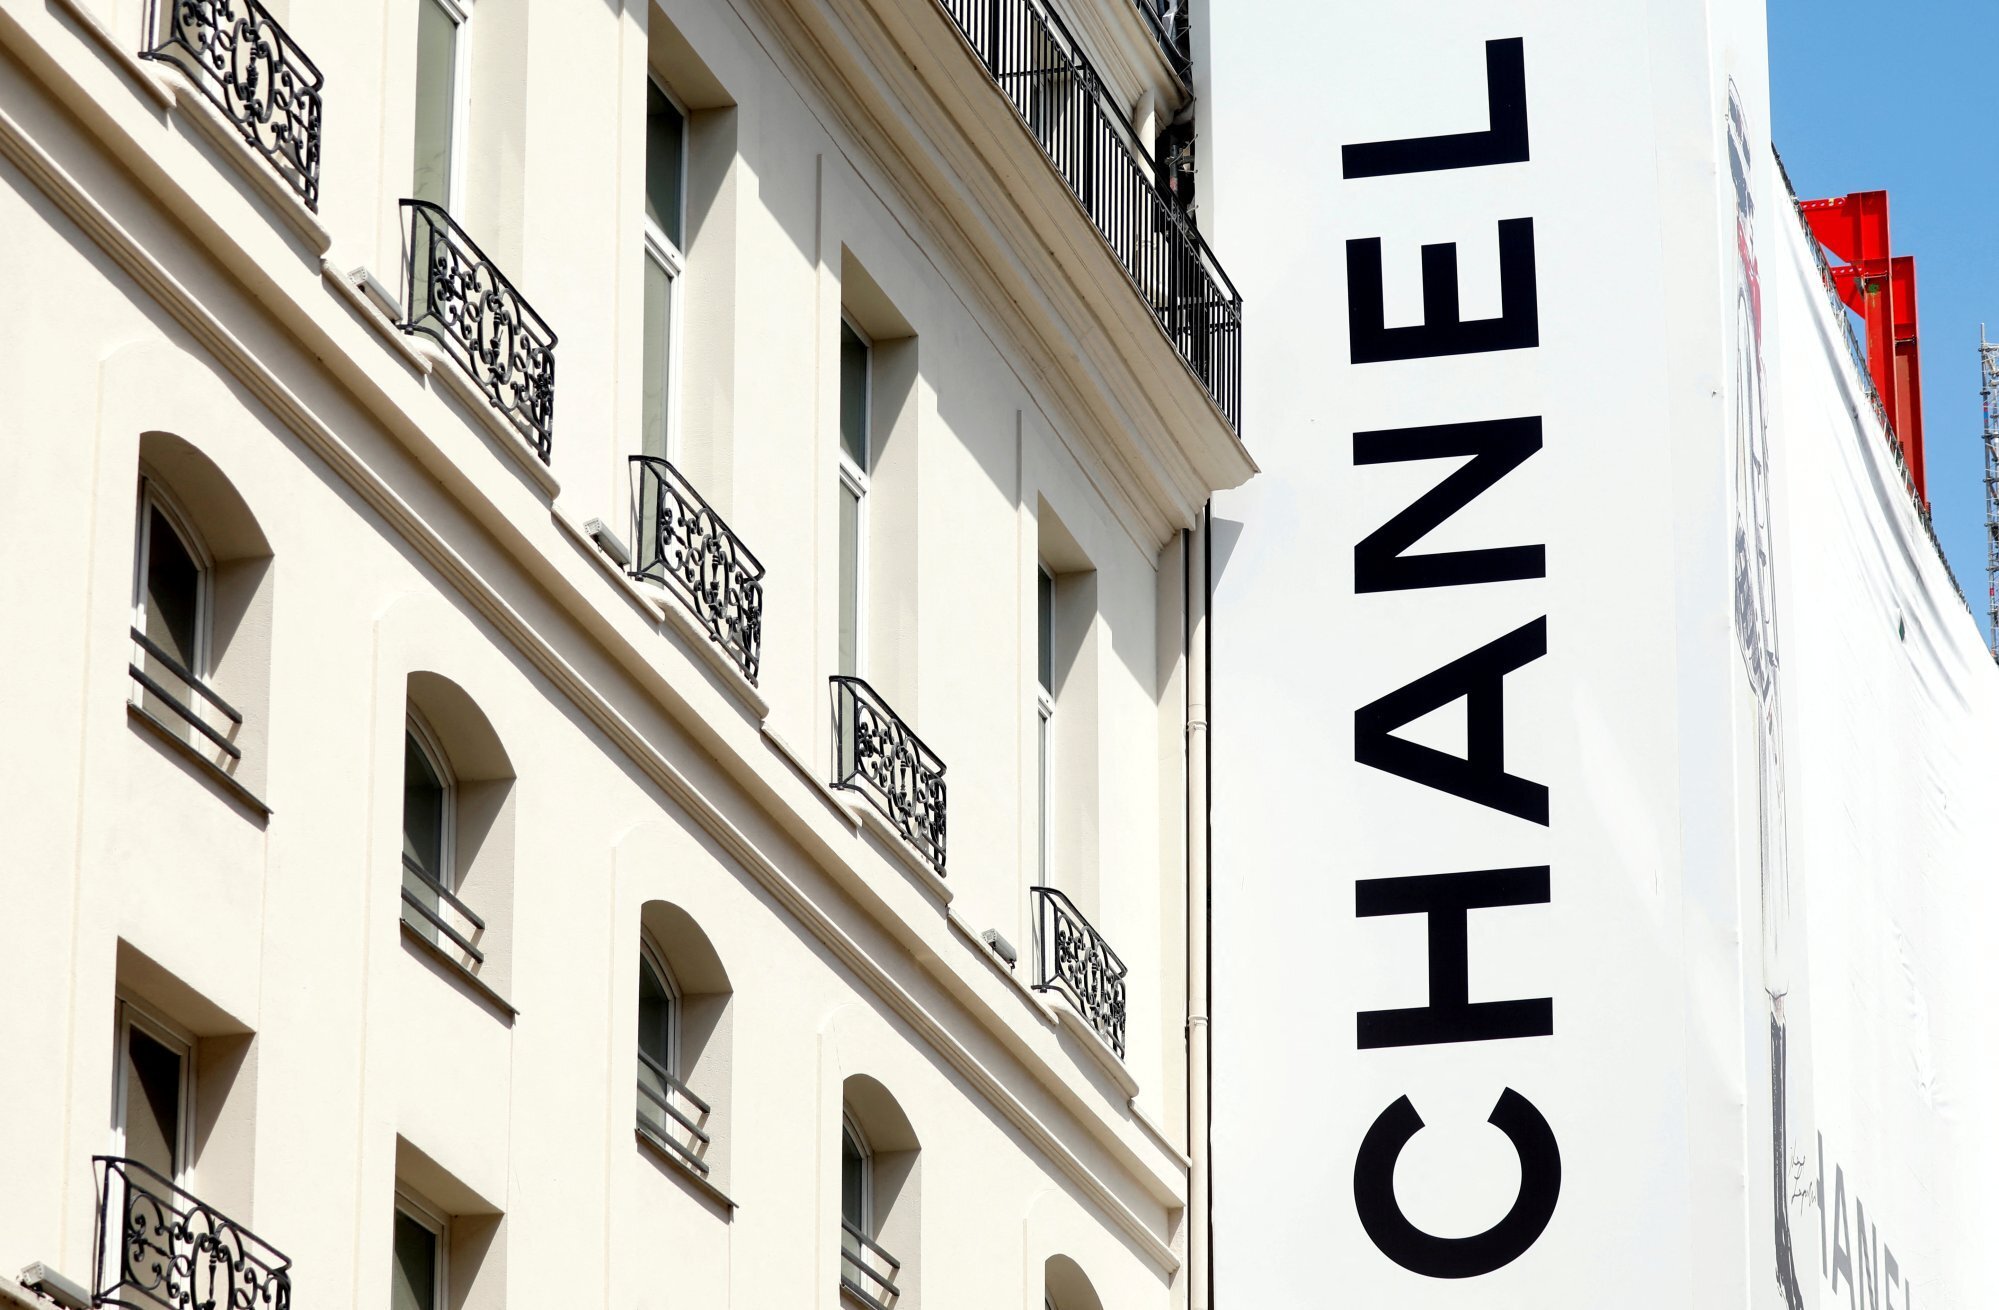 Hermes, Chanel, Louis Vuitton pause business in Russia over